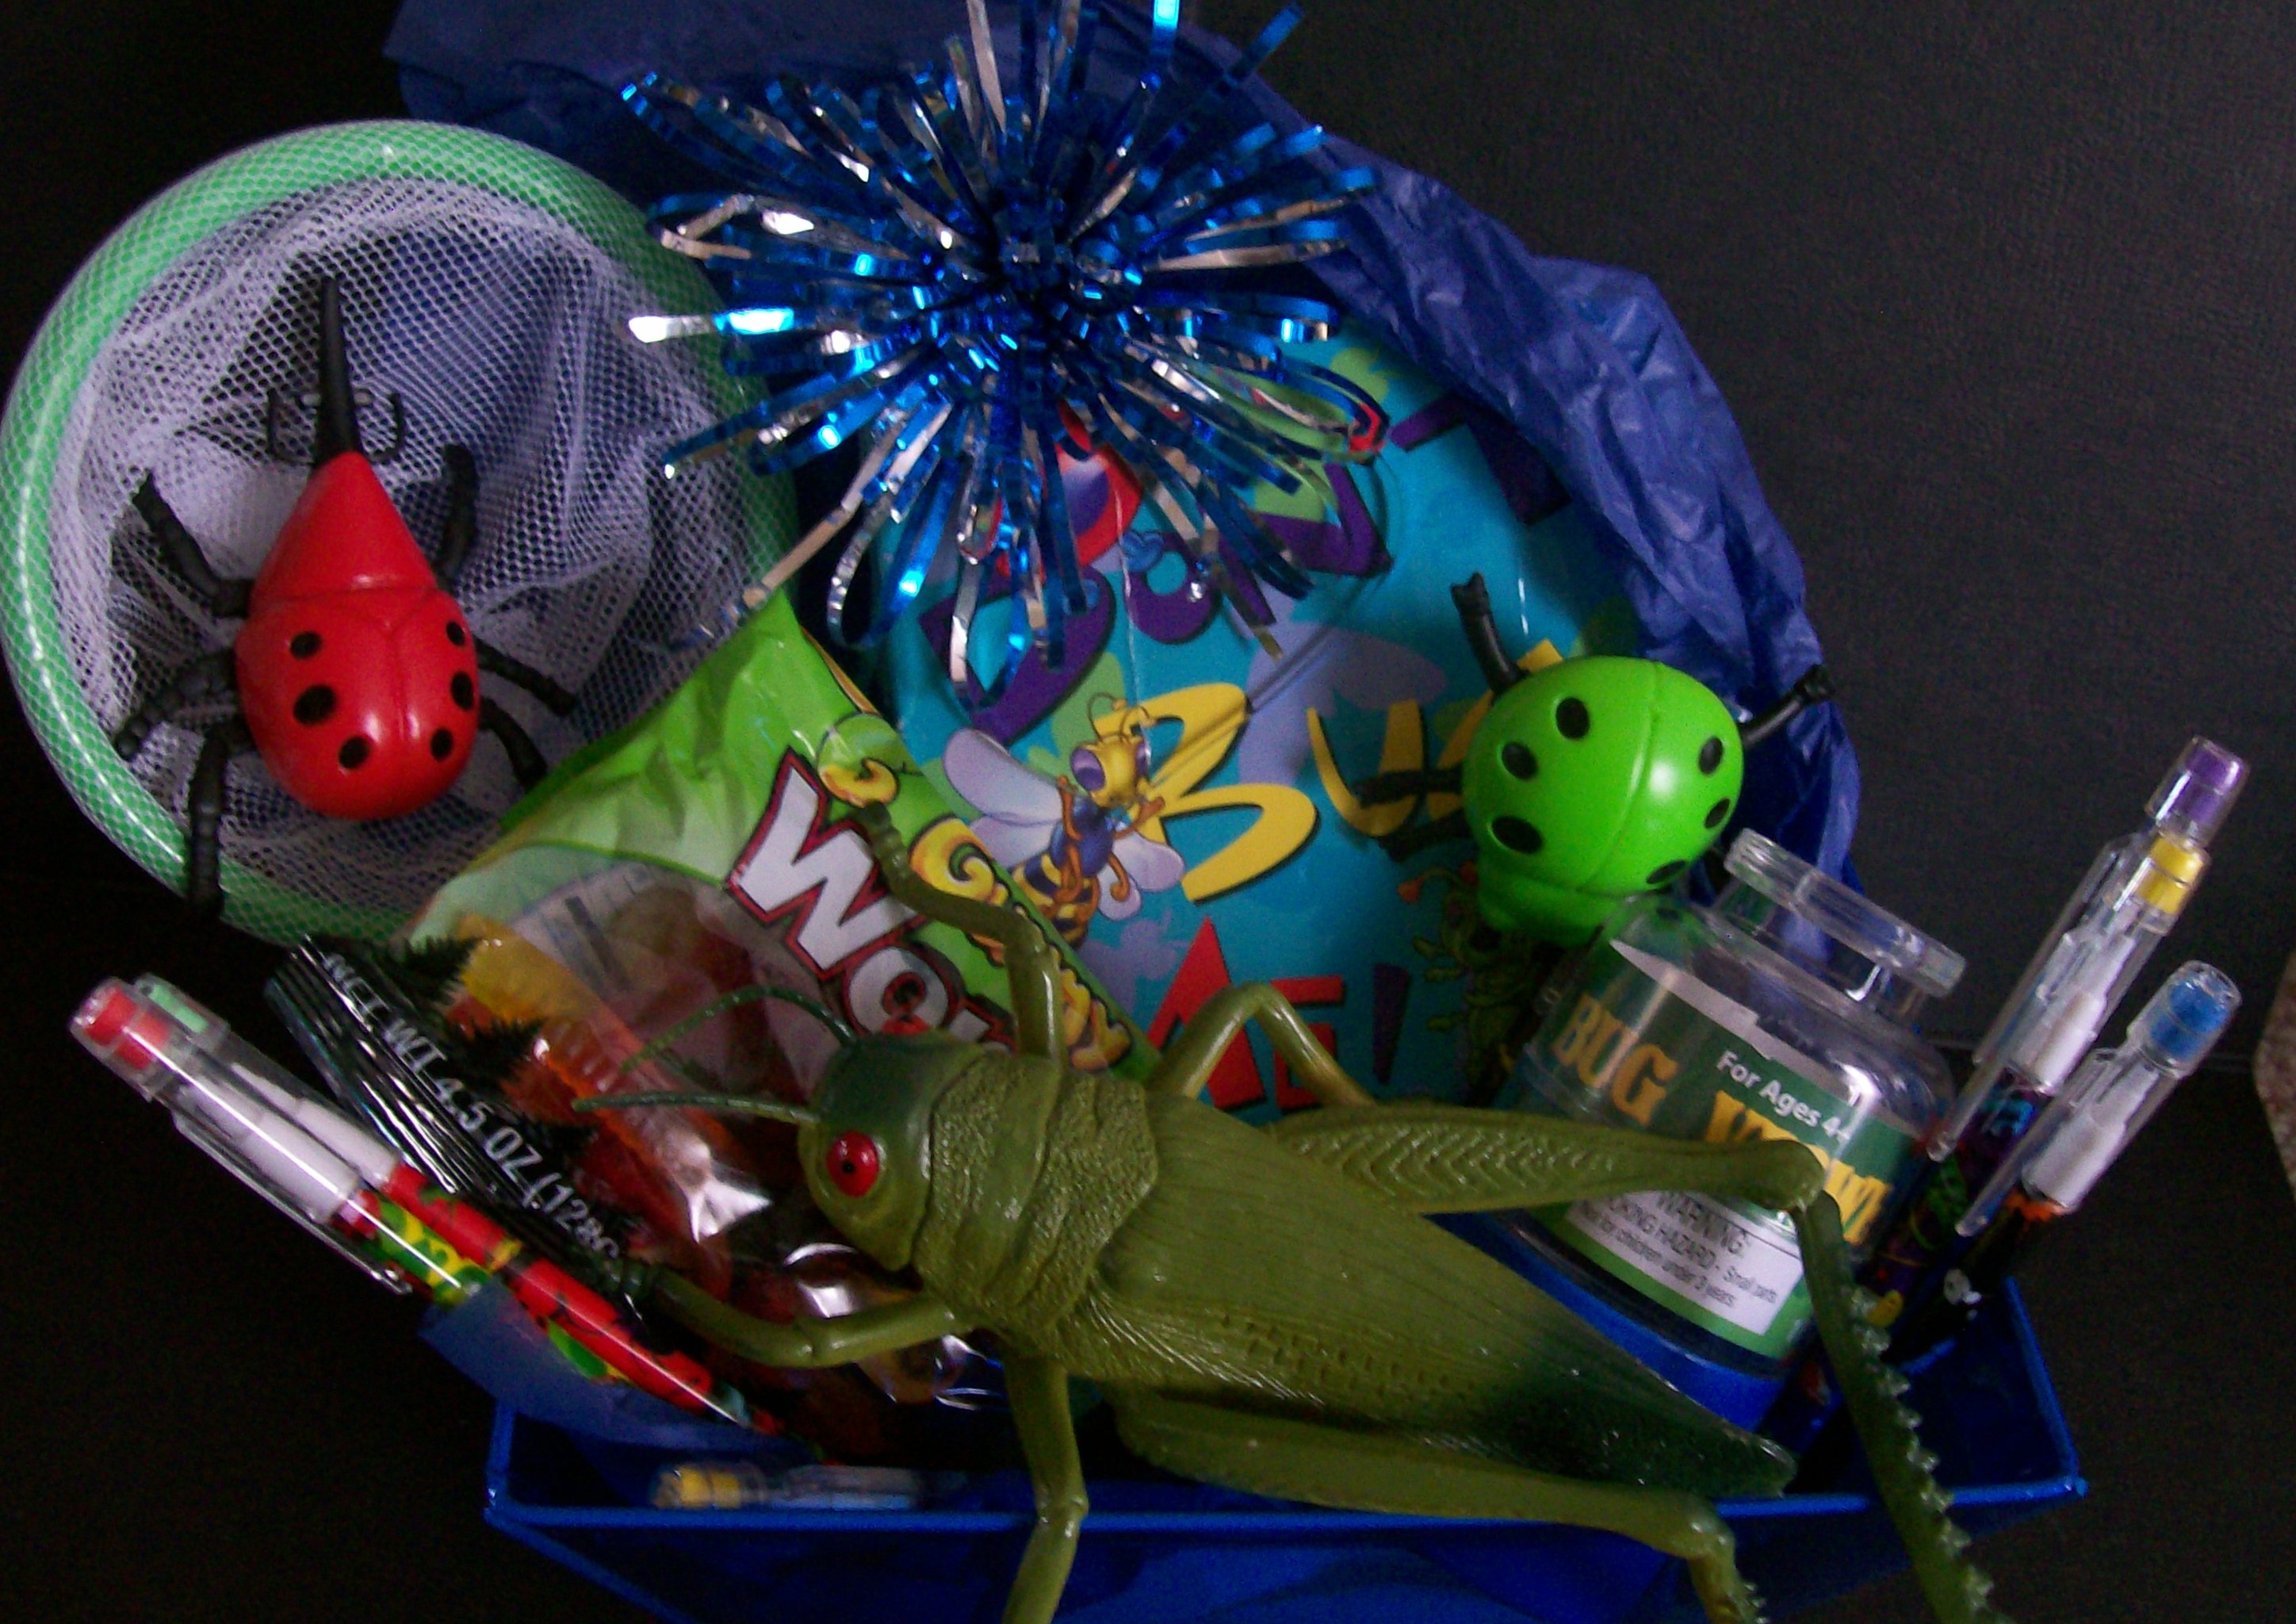 Small Fun and Games Gift Basket to say ‘Great Going’